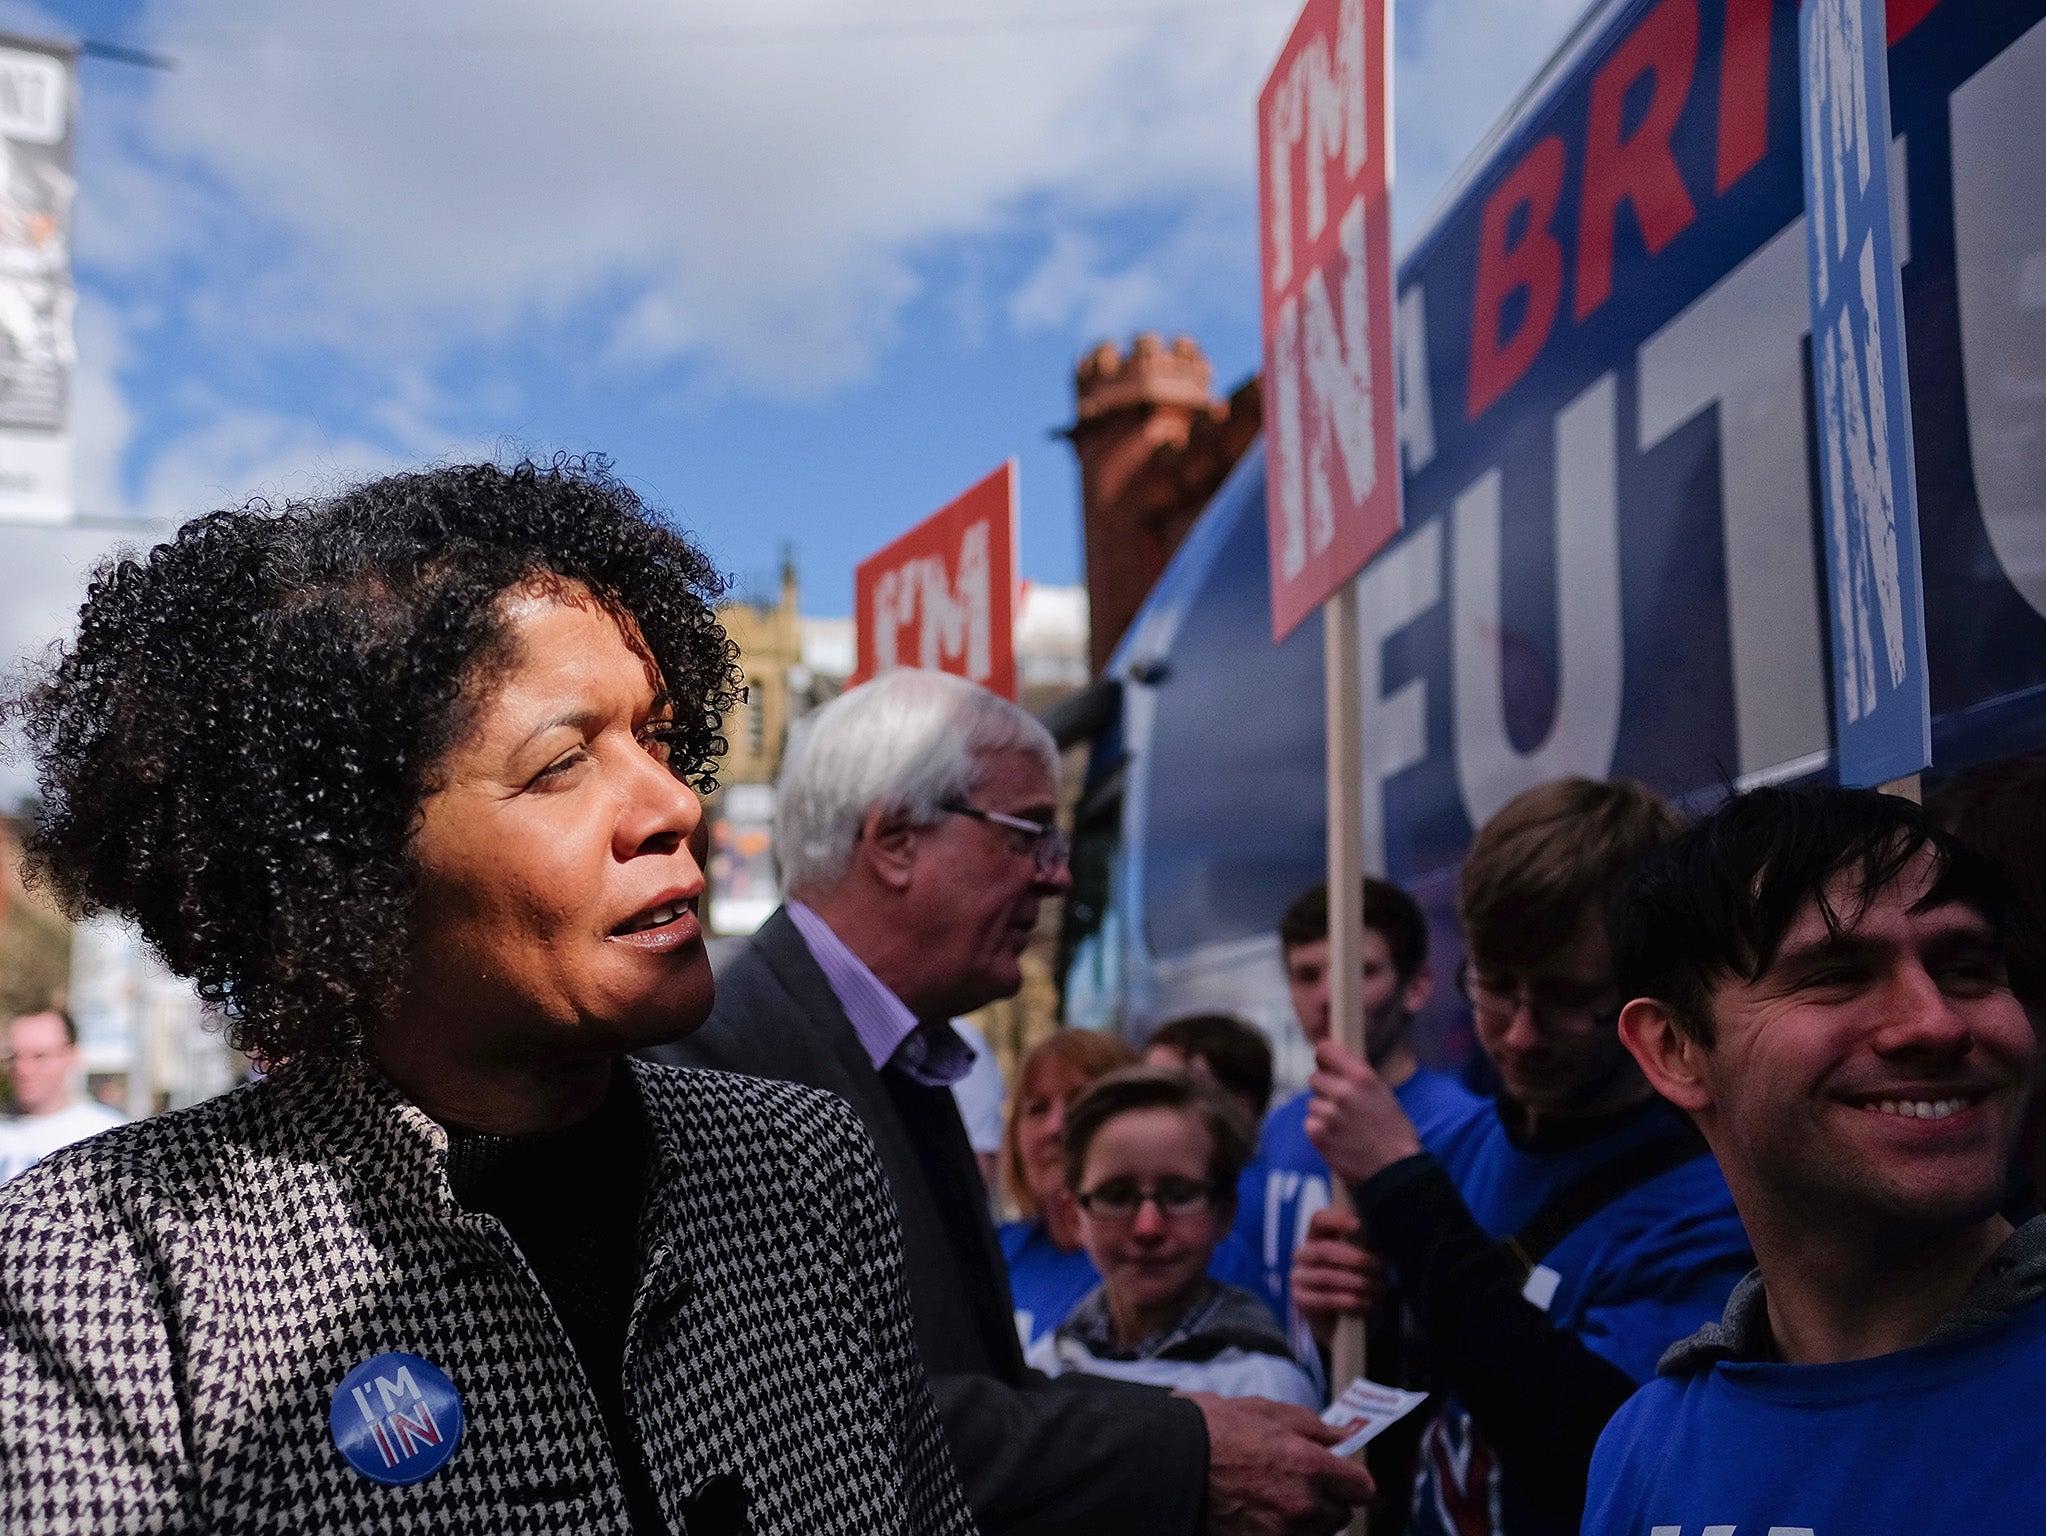 Chi Onwurah, the shadow business minister, said Parliament need to 'strike a better balance'